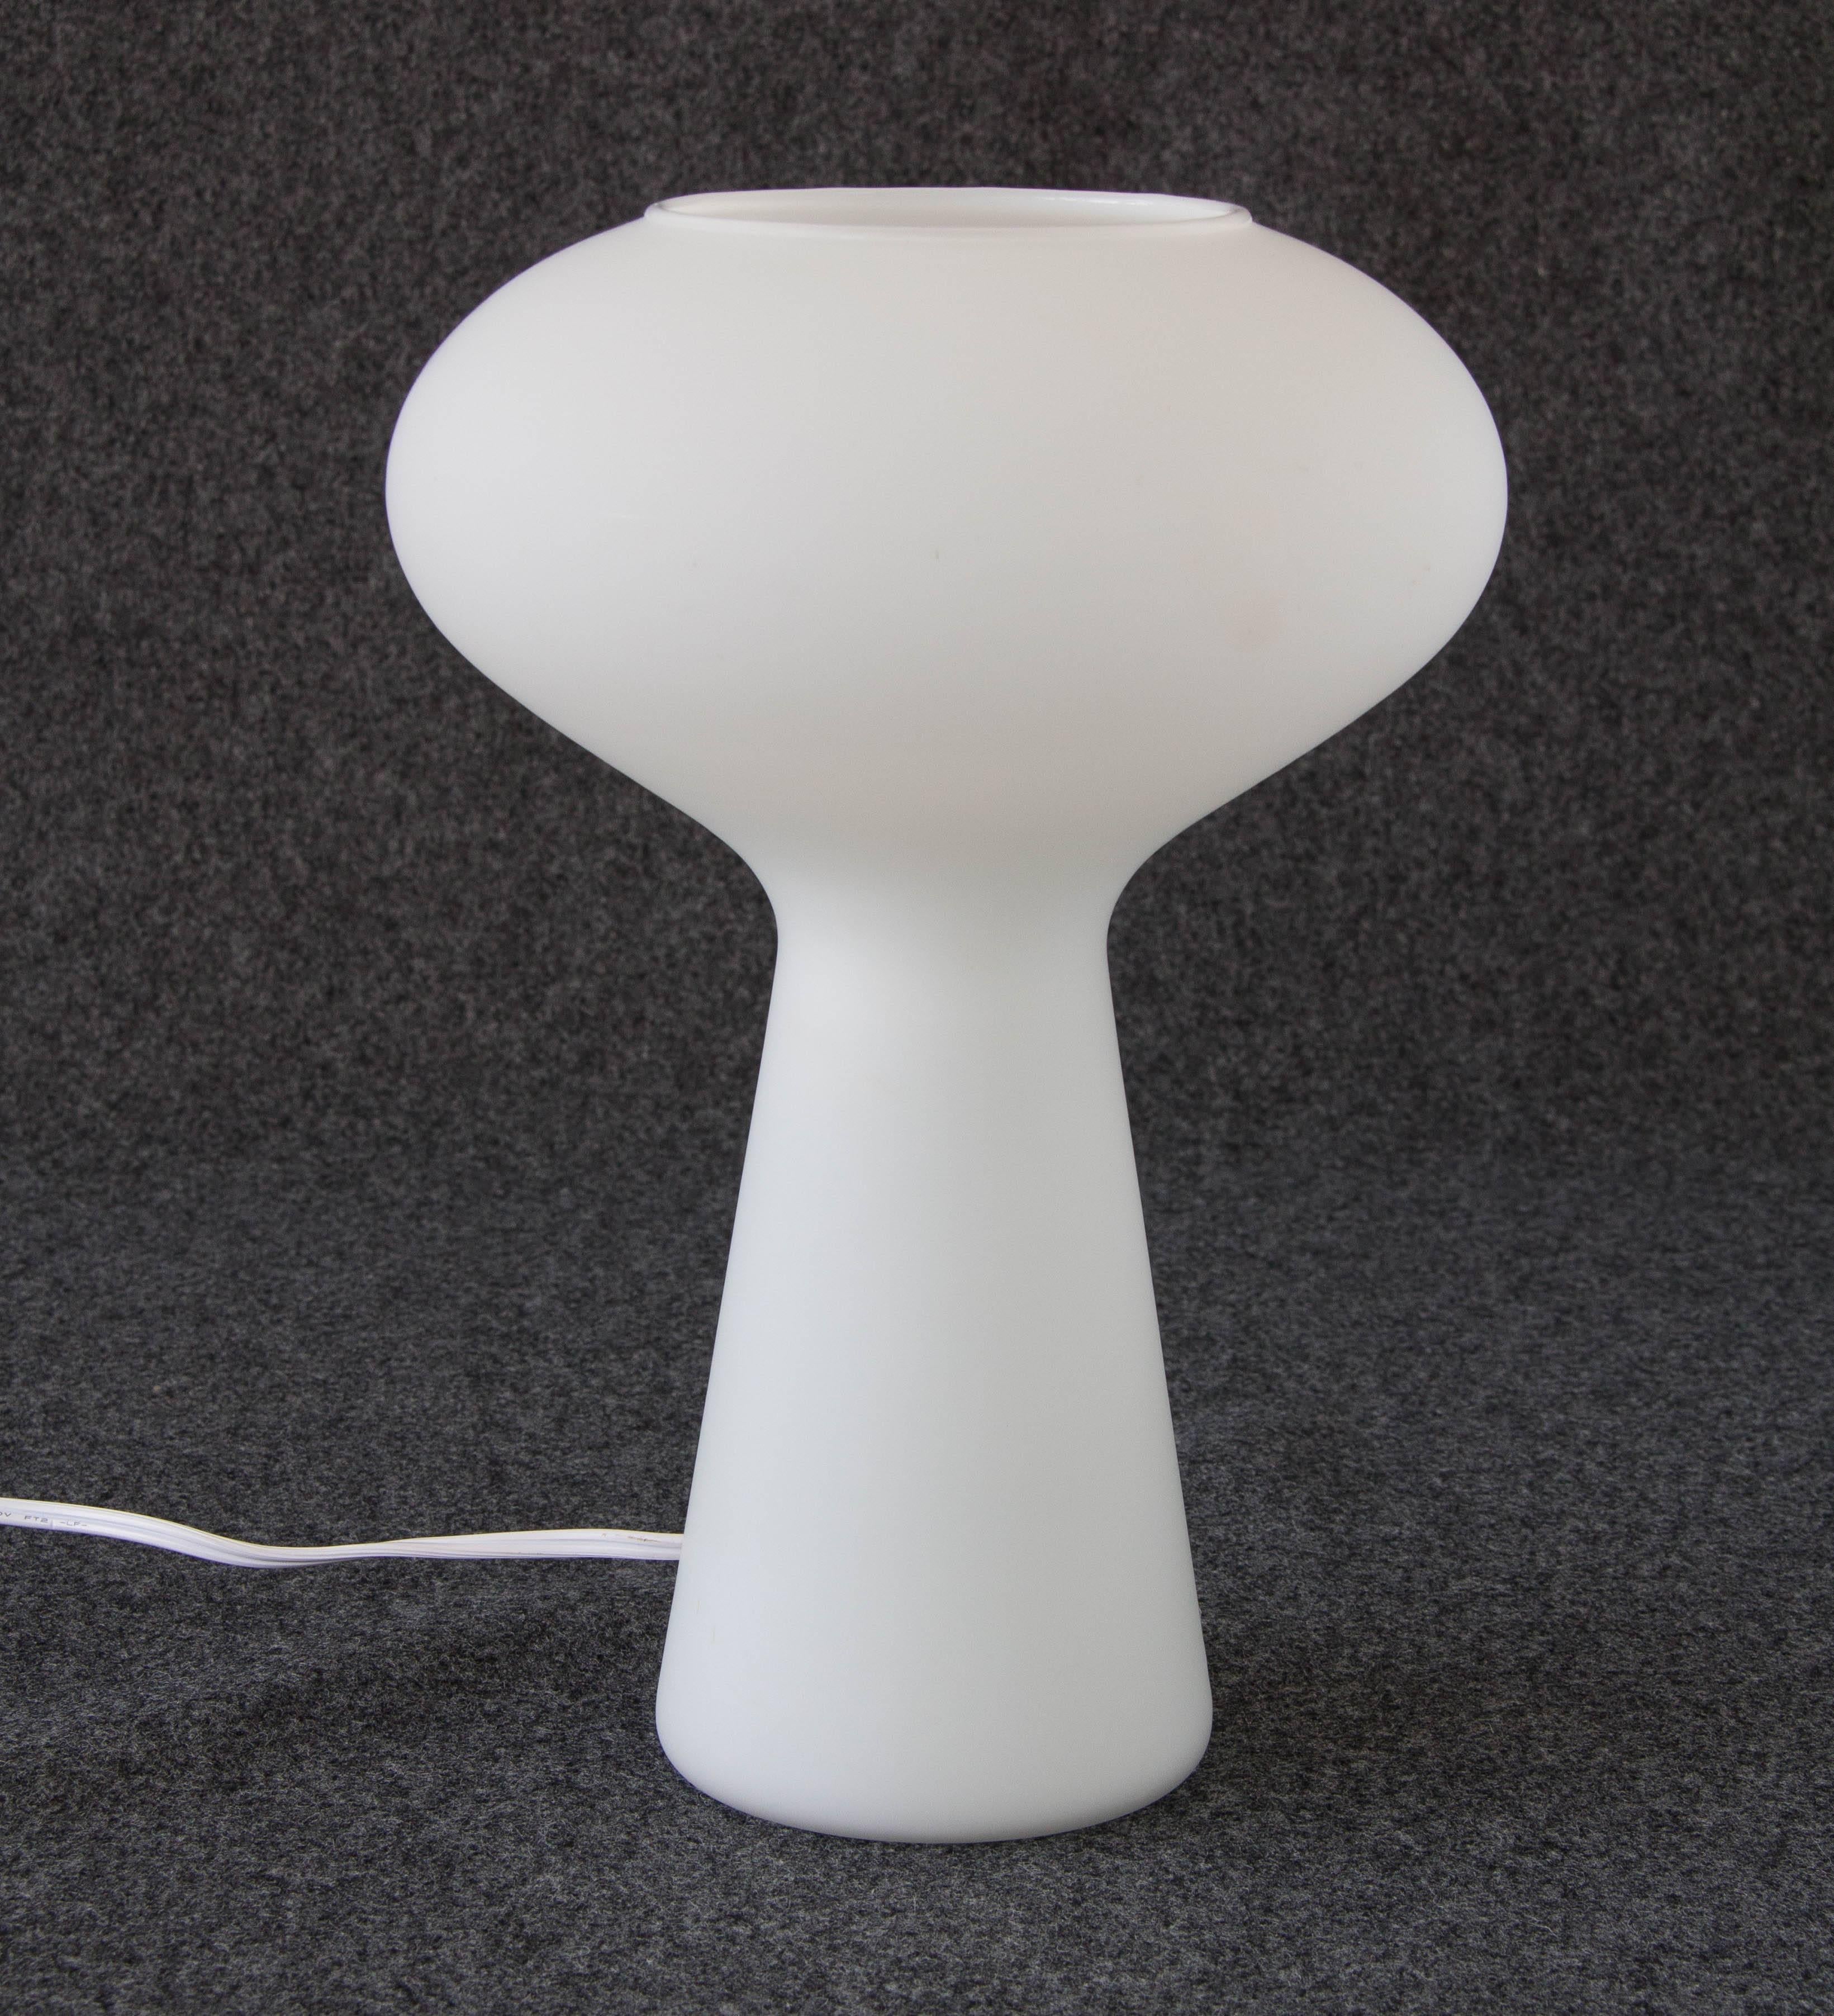 This mushroom lamp emerged in 1954, designed for Finnish glass manufacturer Iitala by Lisa Johansson-Pape, and was marketed by Stockmann-Orno. The lamp has an open top with a biomorphic, curved form, sitting atop a rounded base. The piece is made